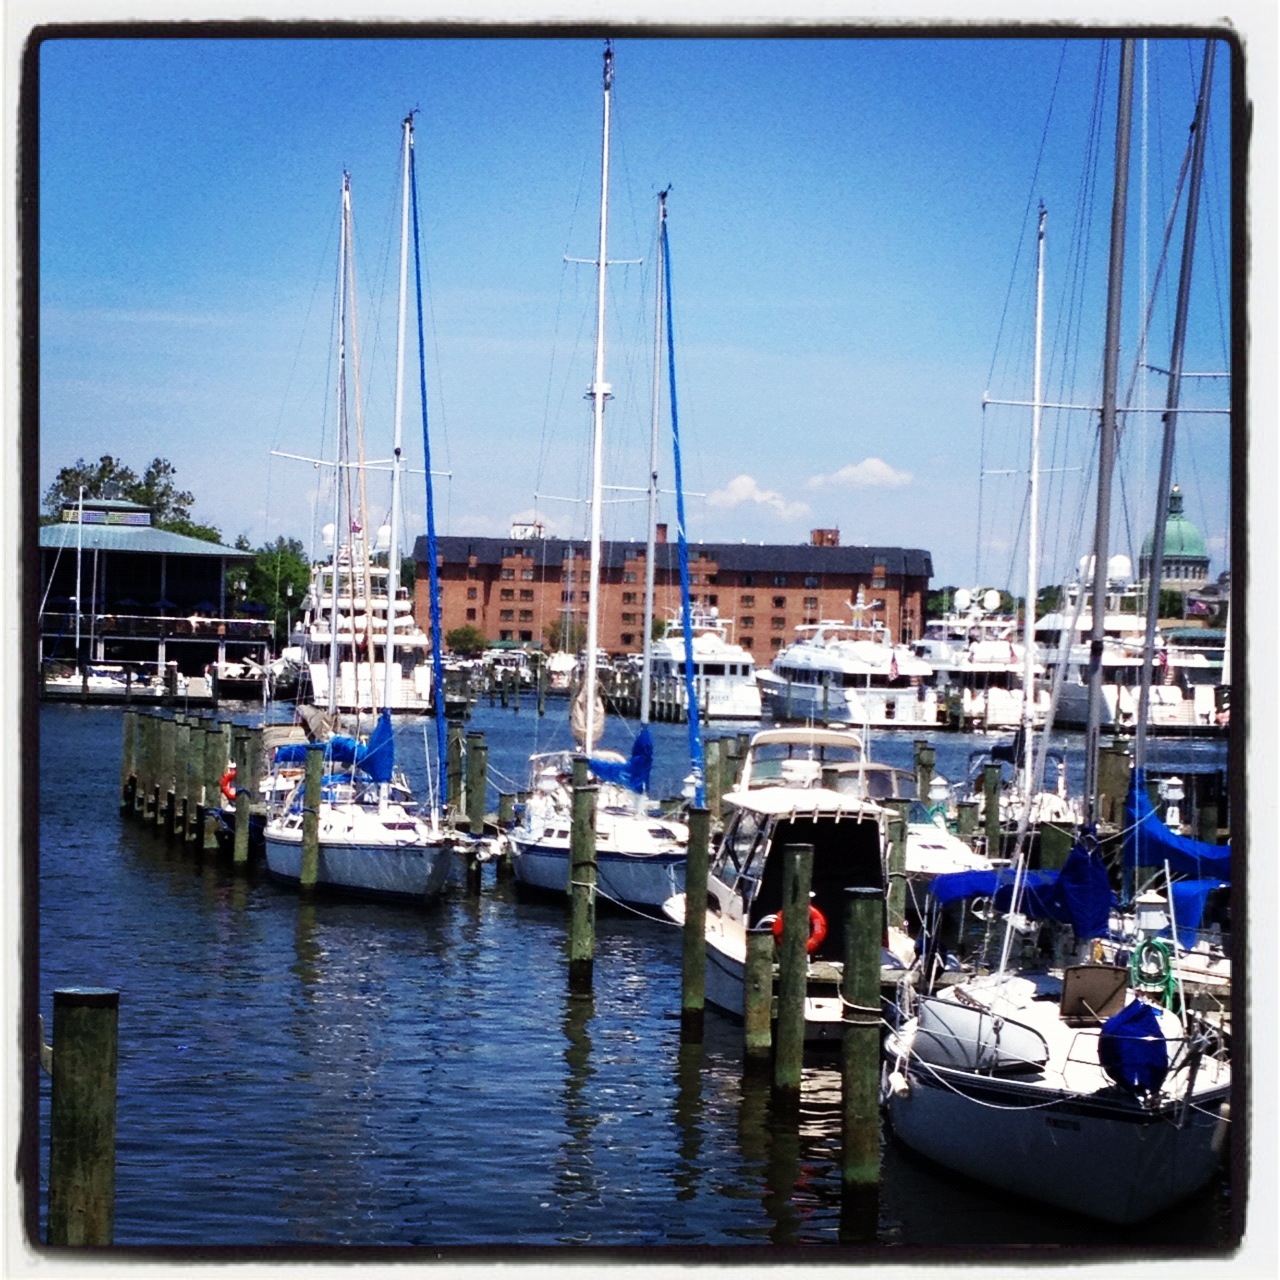 also spent at a lot of time in Annapolis...